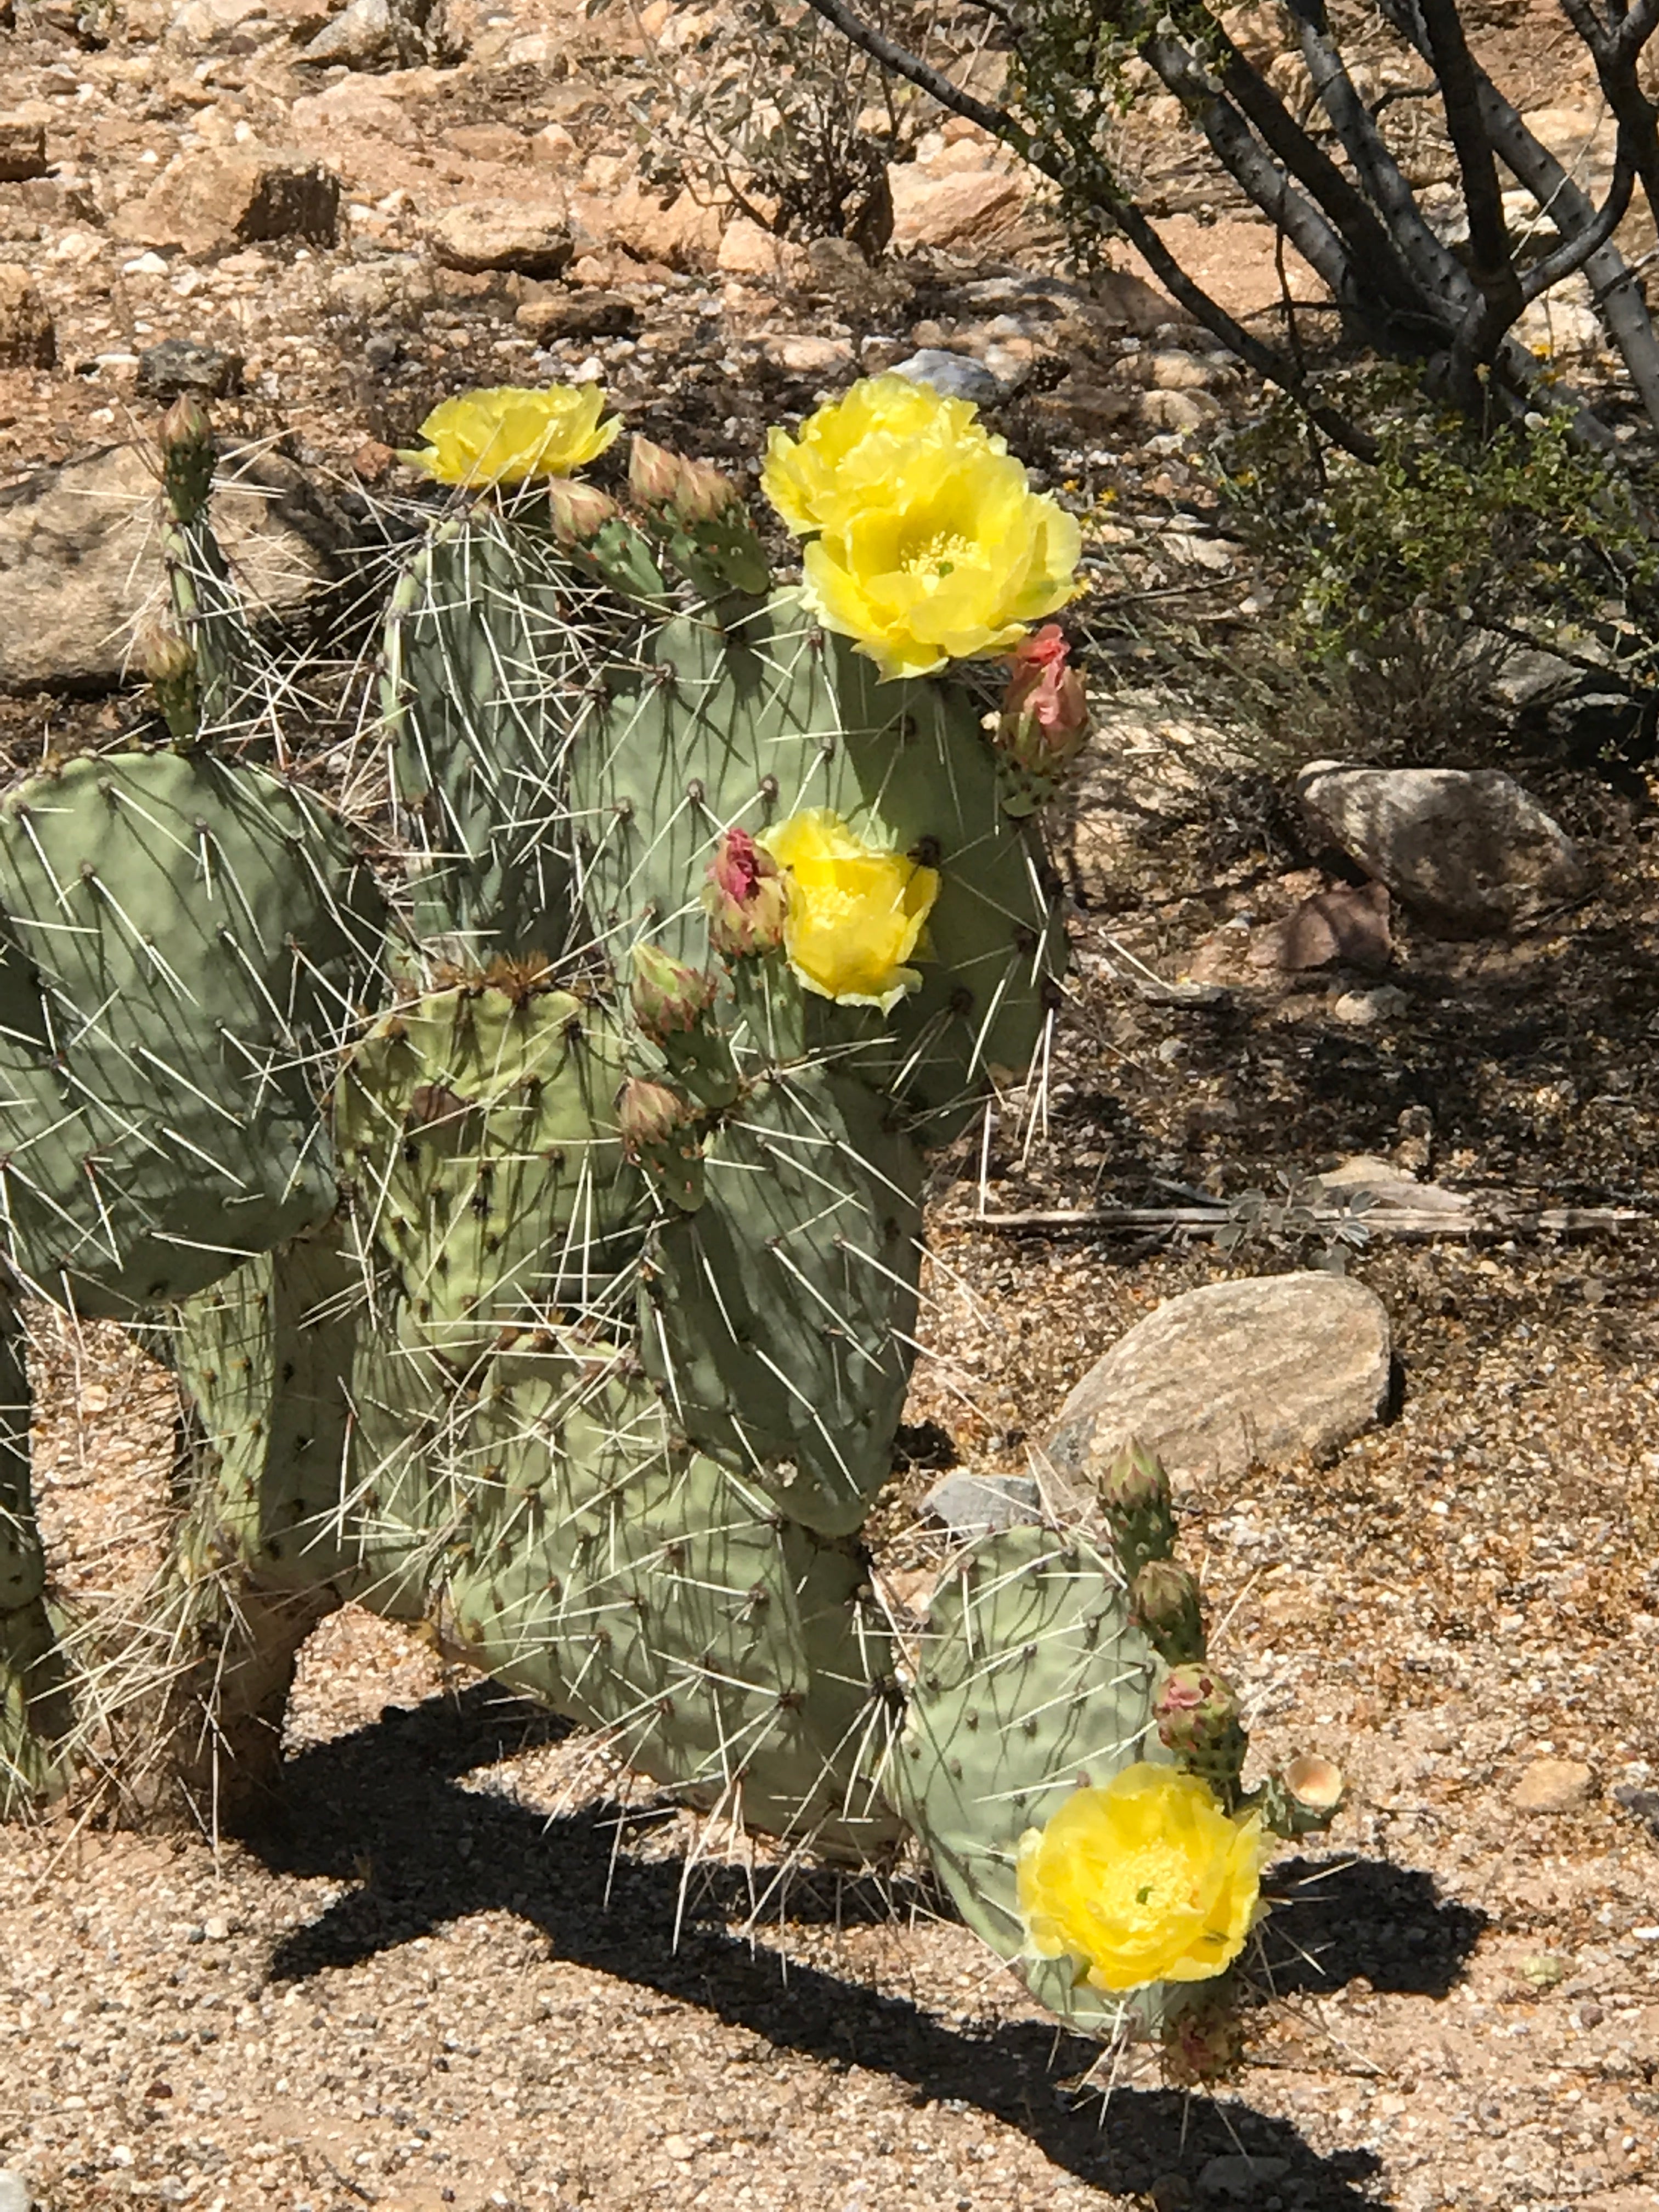 Flowering cacti are everywhere til you get to the divide of vegetations